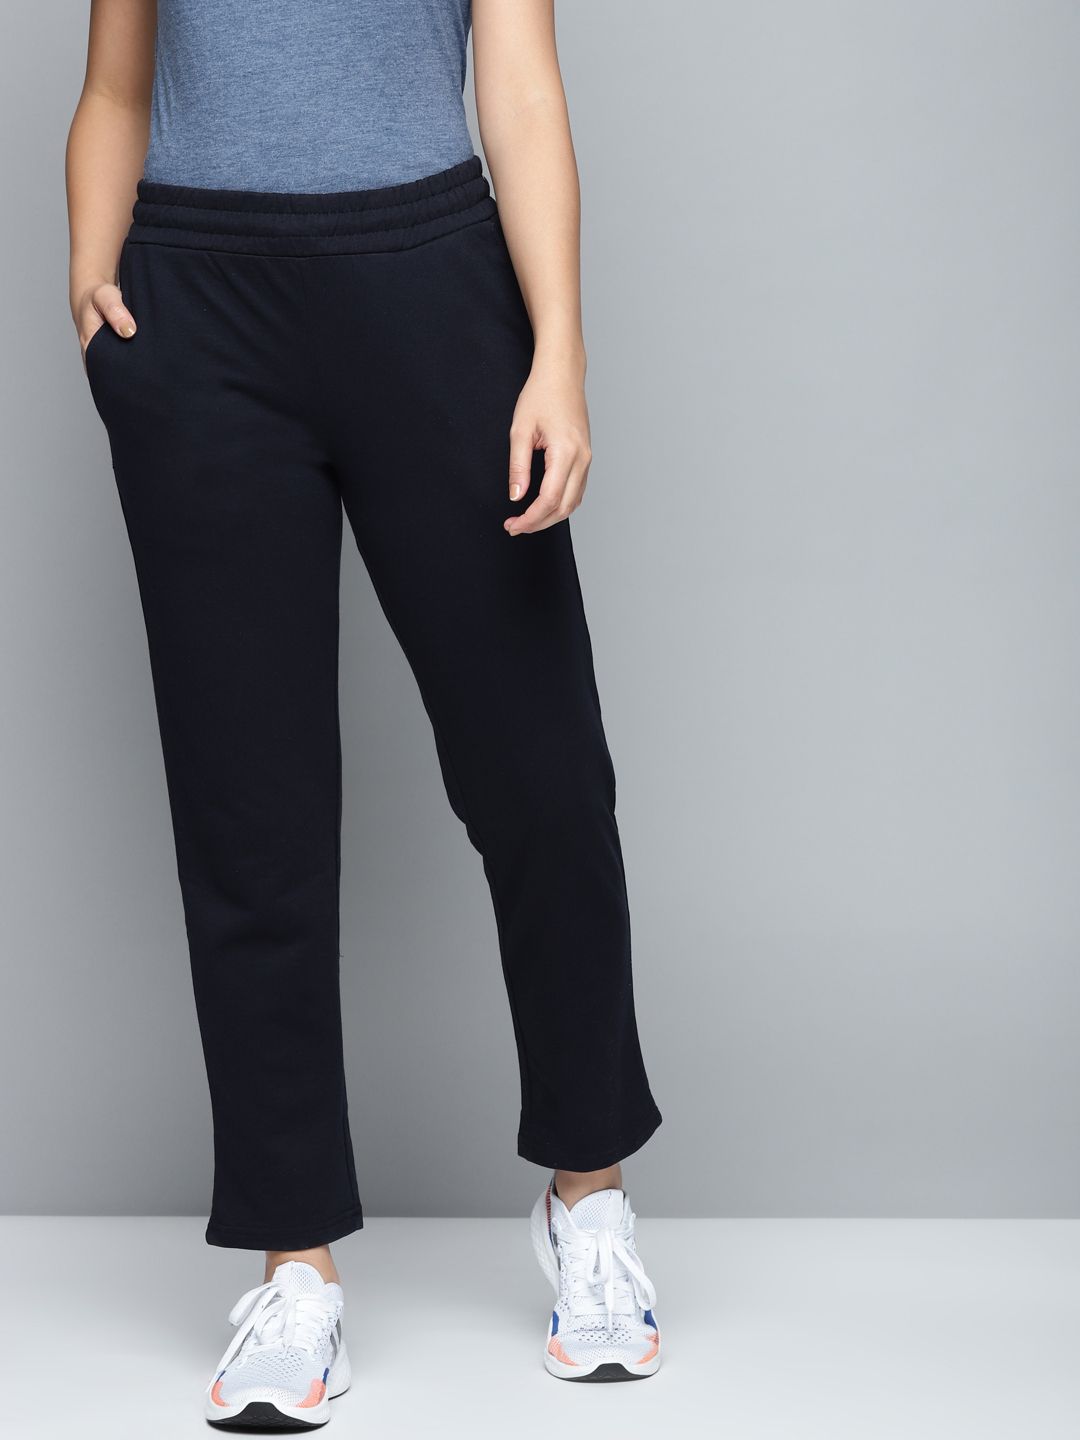 Alcis Women Navy Blue Solid Track Pants Price in India